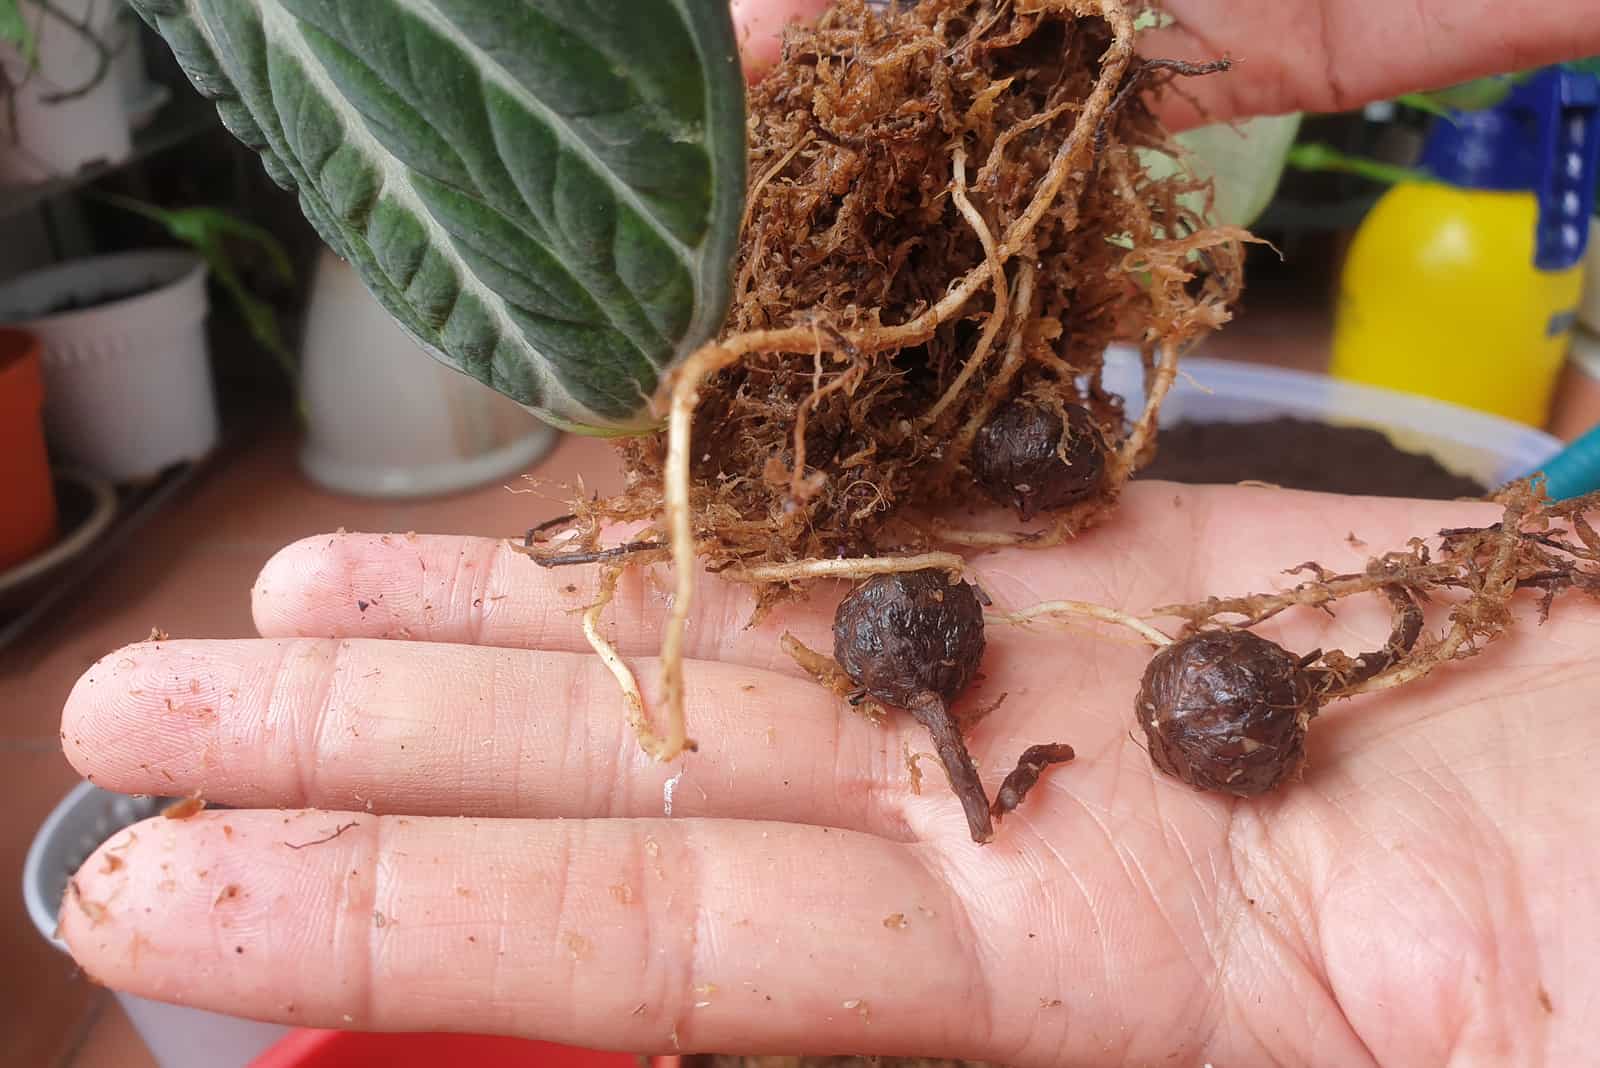 hand showing seeds of Alocasia plant